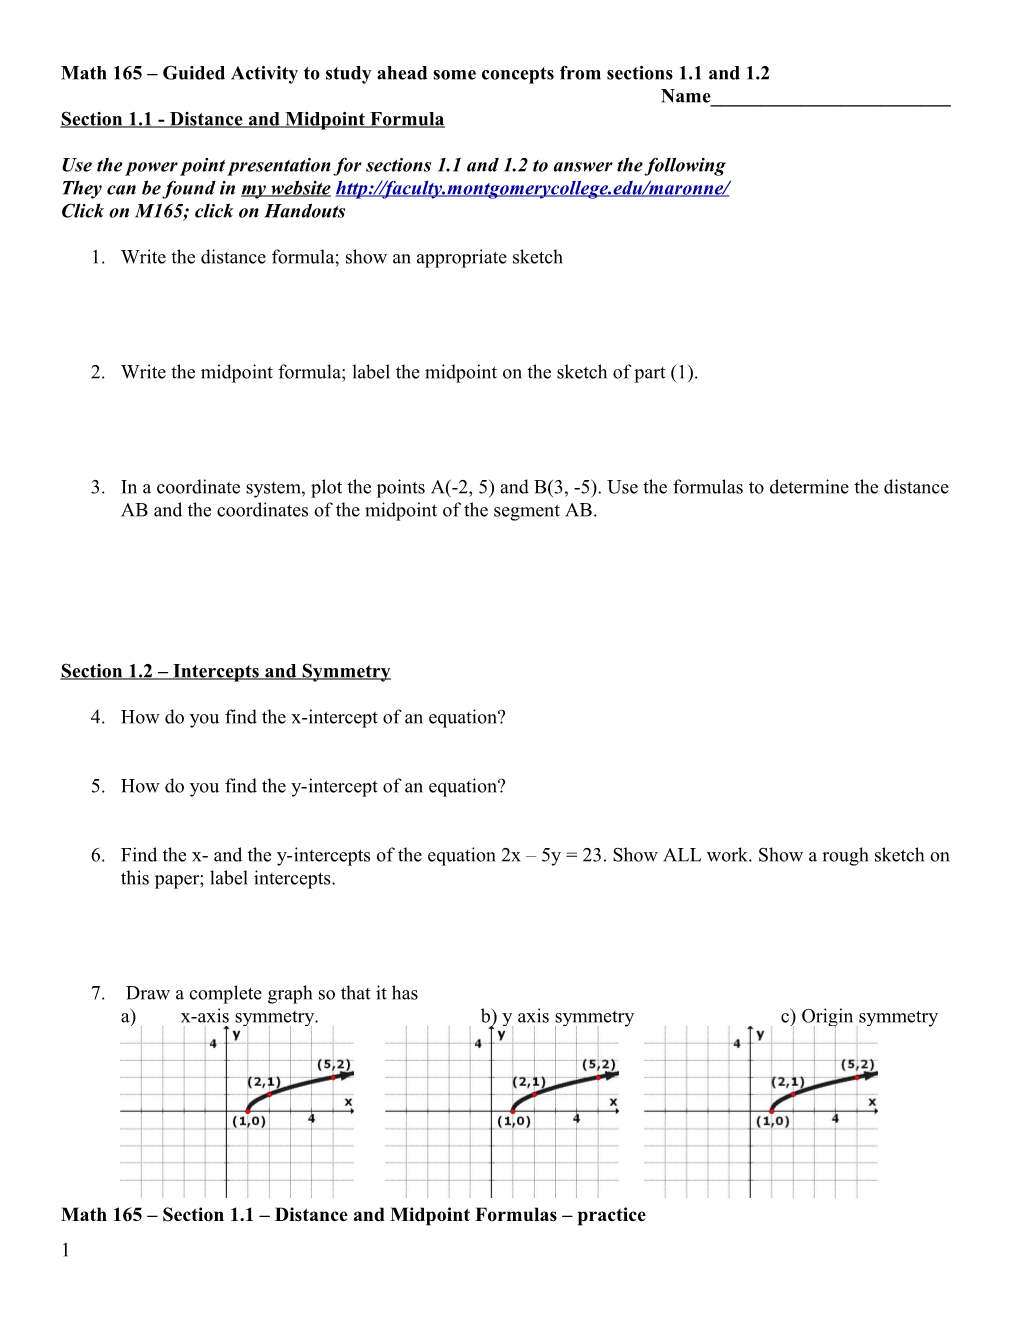 Math 165 Guided Activity to Study Ahead Some Concepts from Sections 1.1 and 1.2